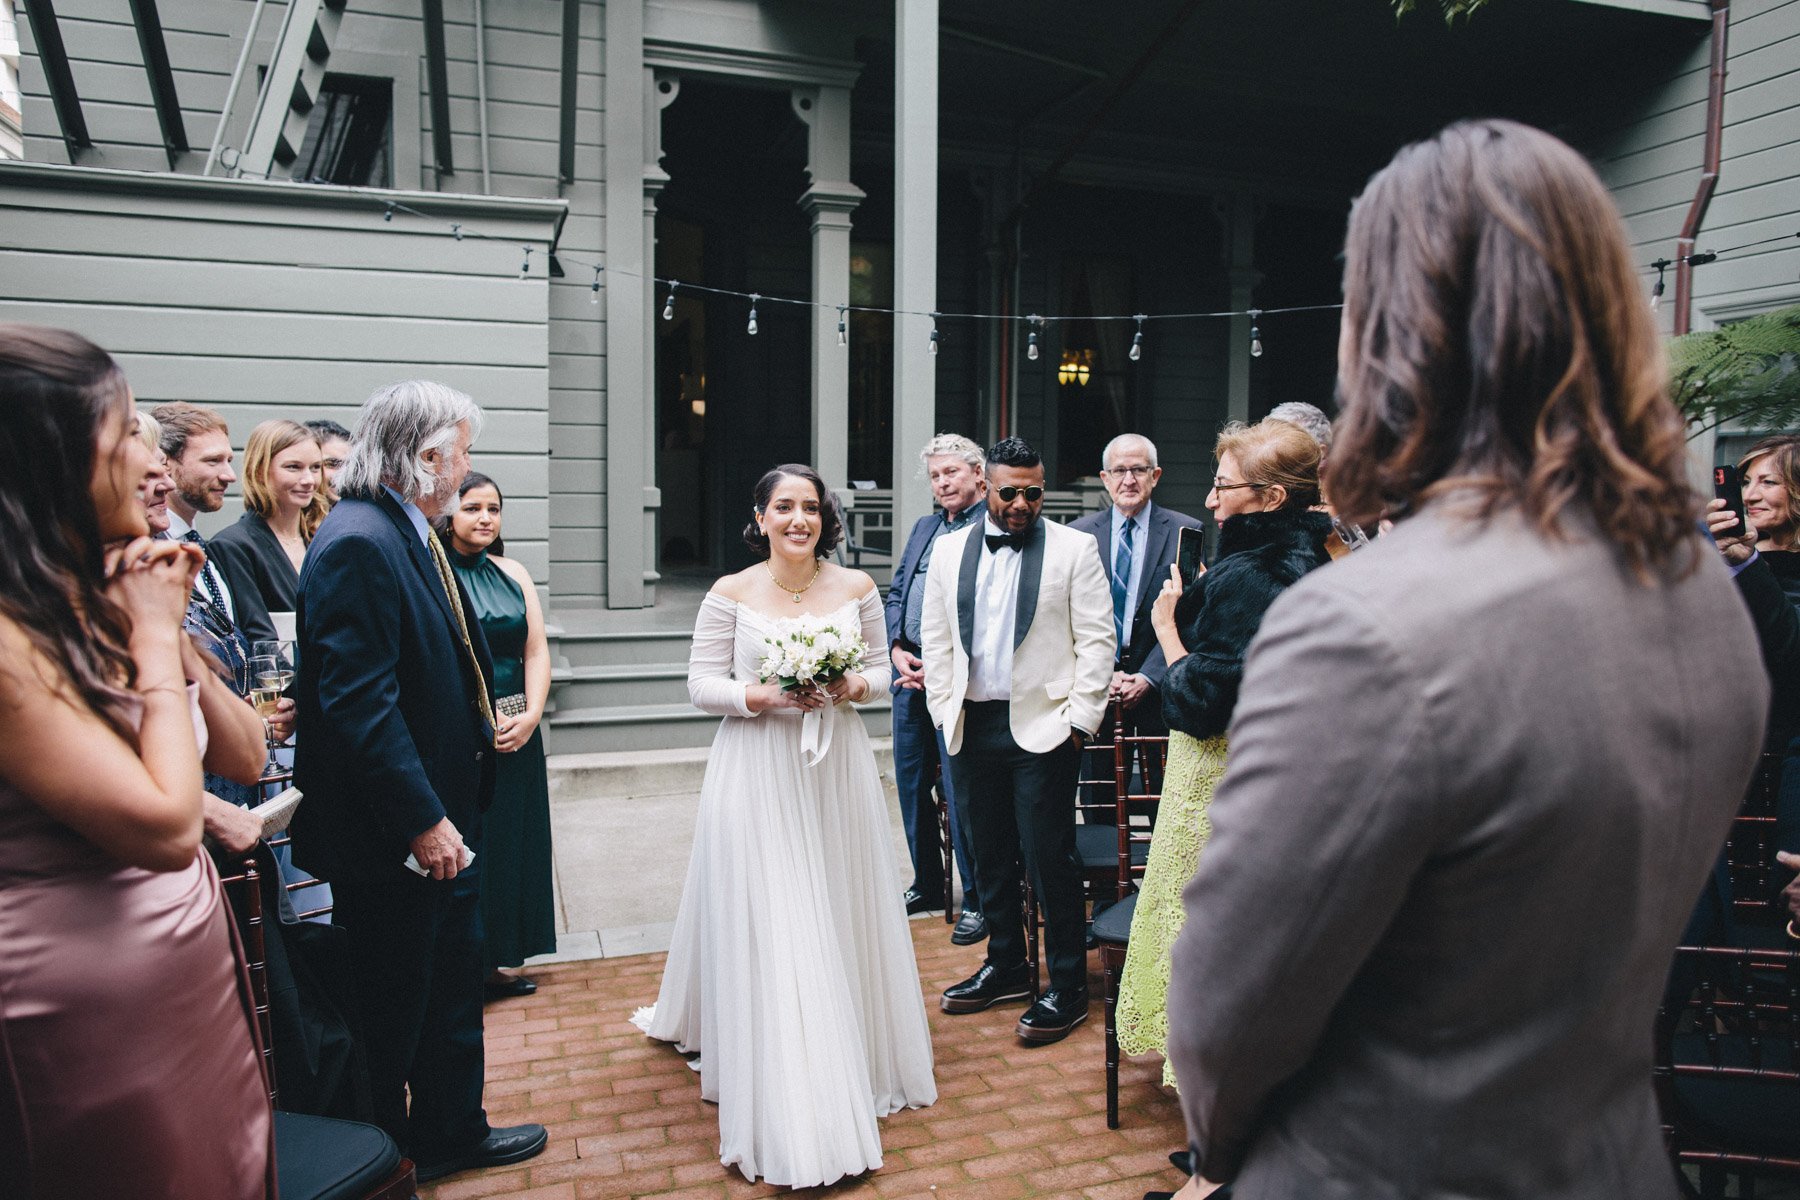 Bride walks down the aisle in the backyard of the Haas-Lilienthal House